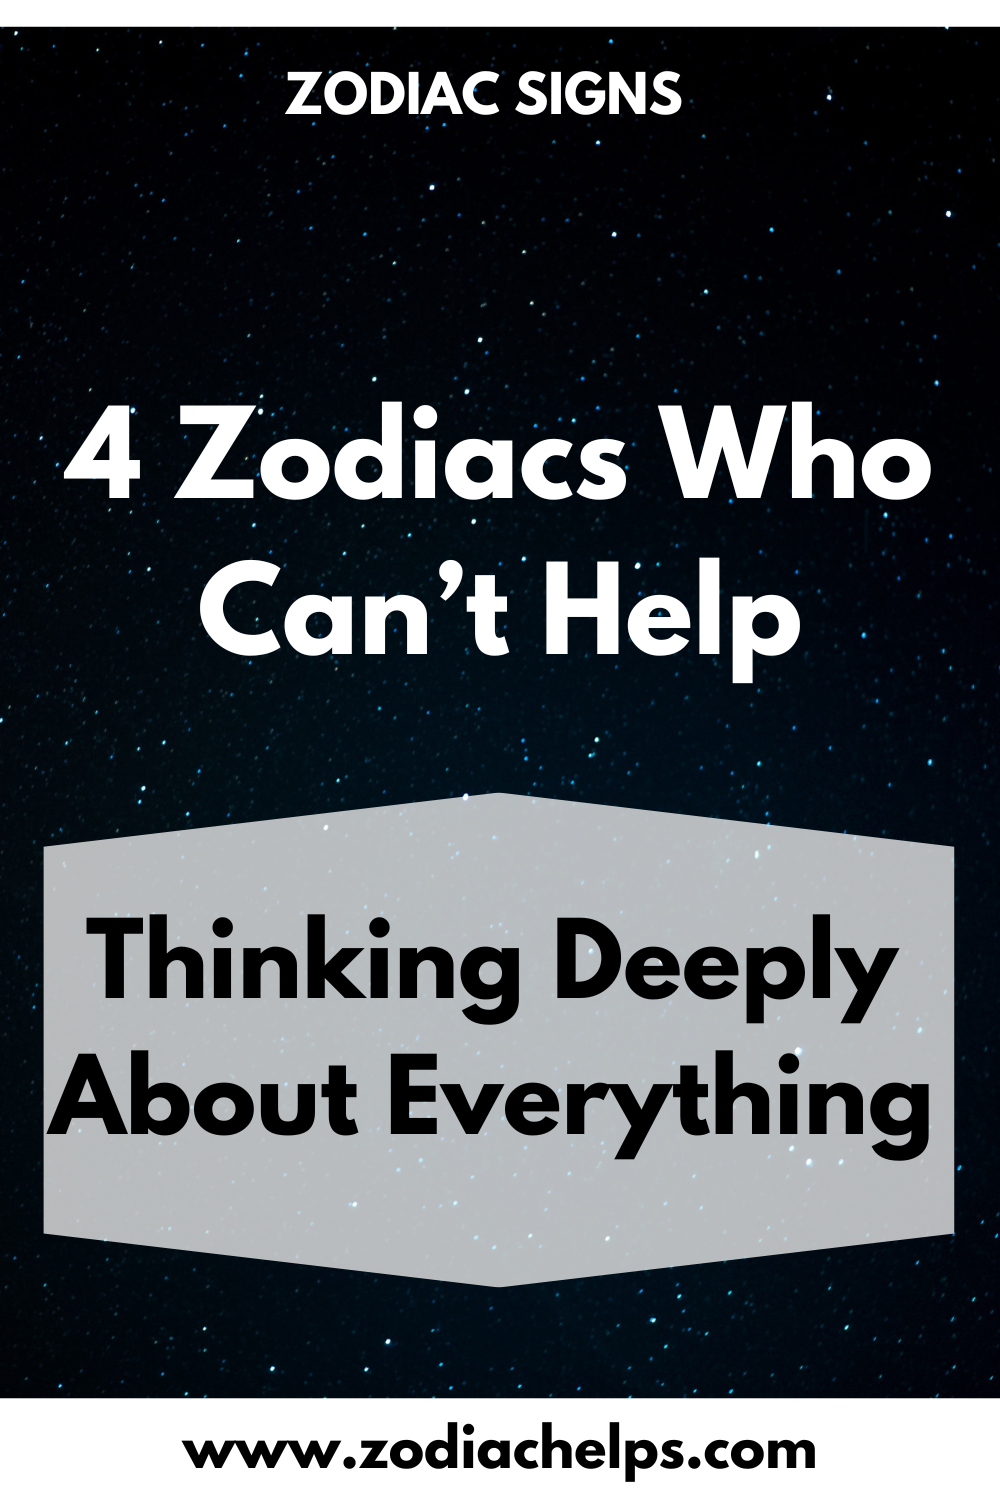 4 Zodiacs Who Can’t Help Thinking Deeply About Everything